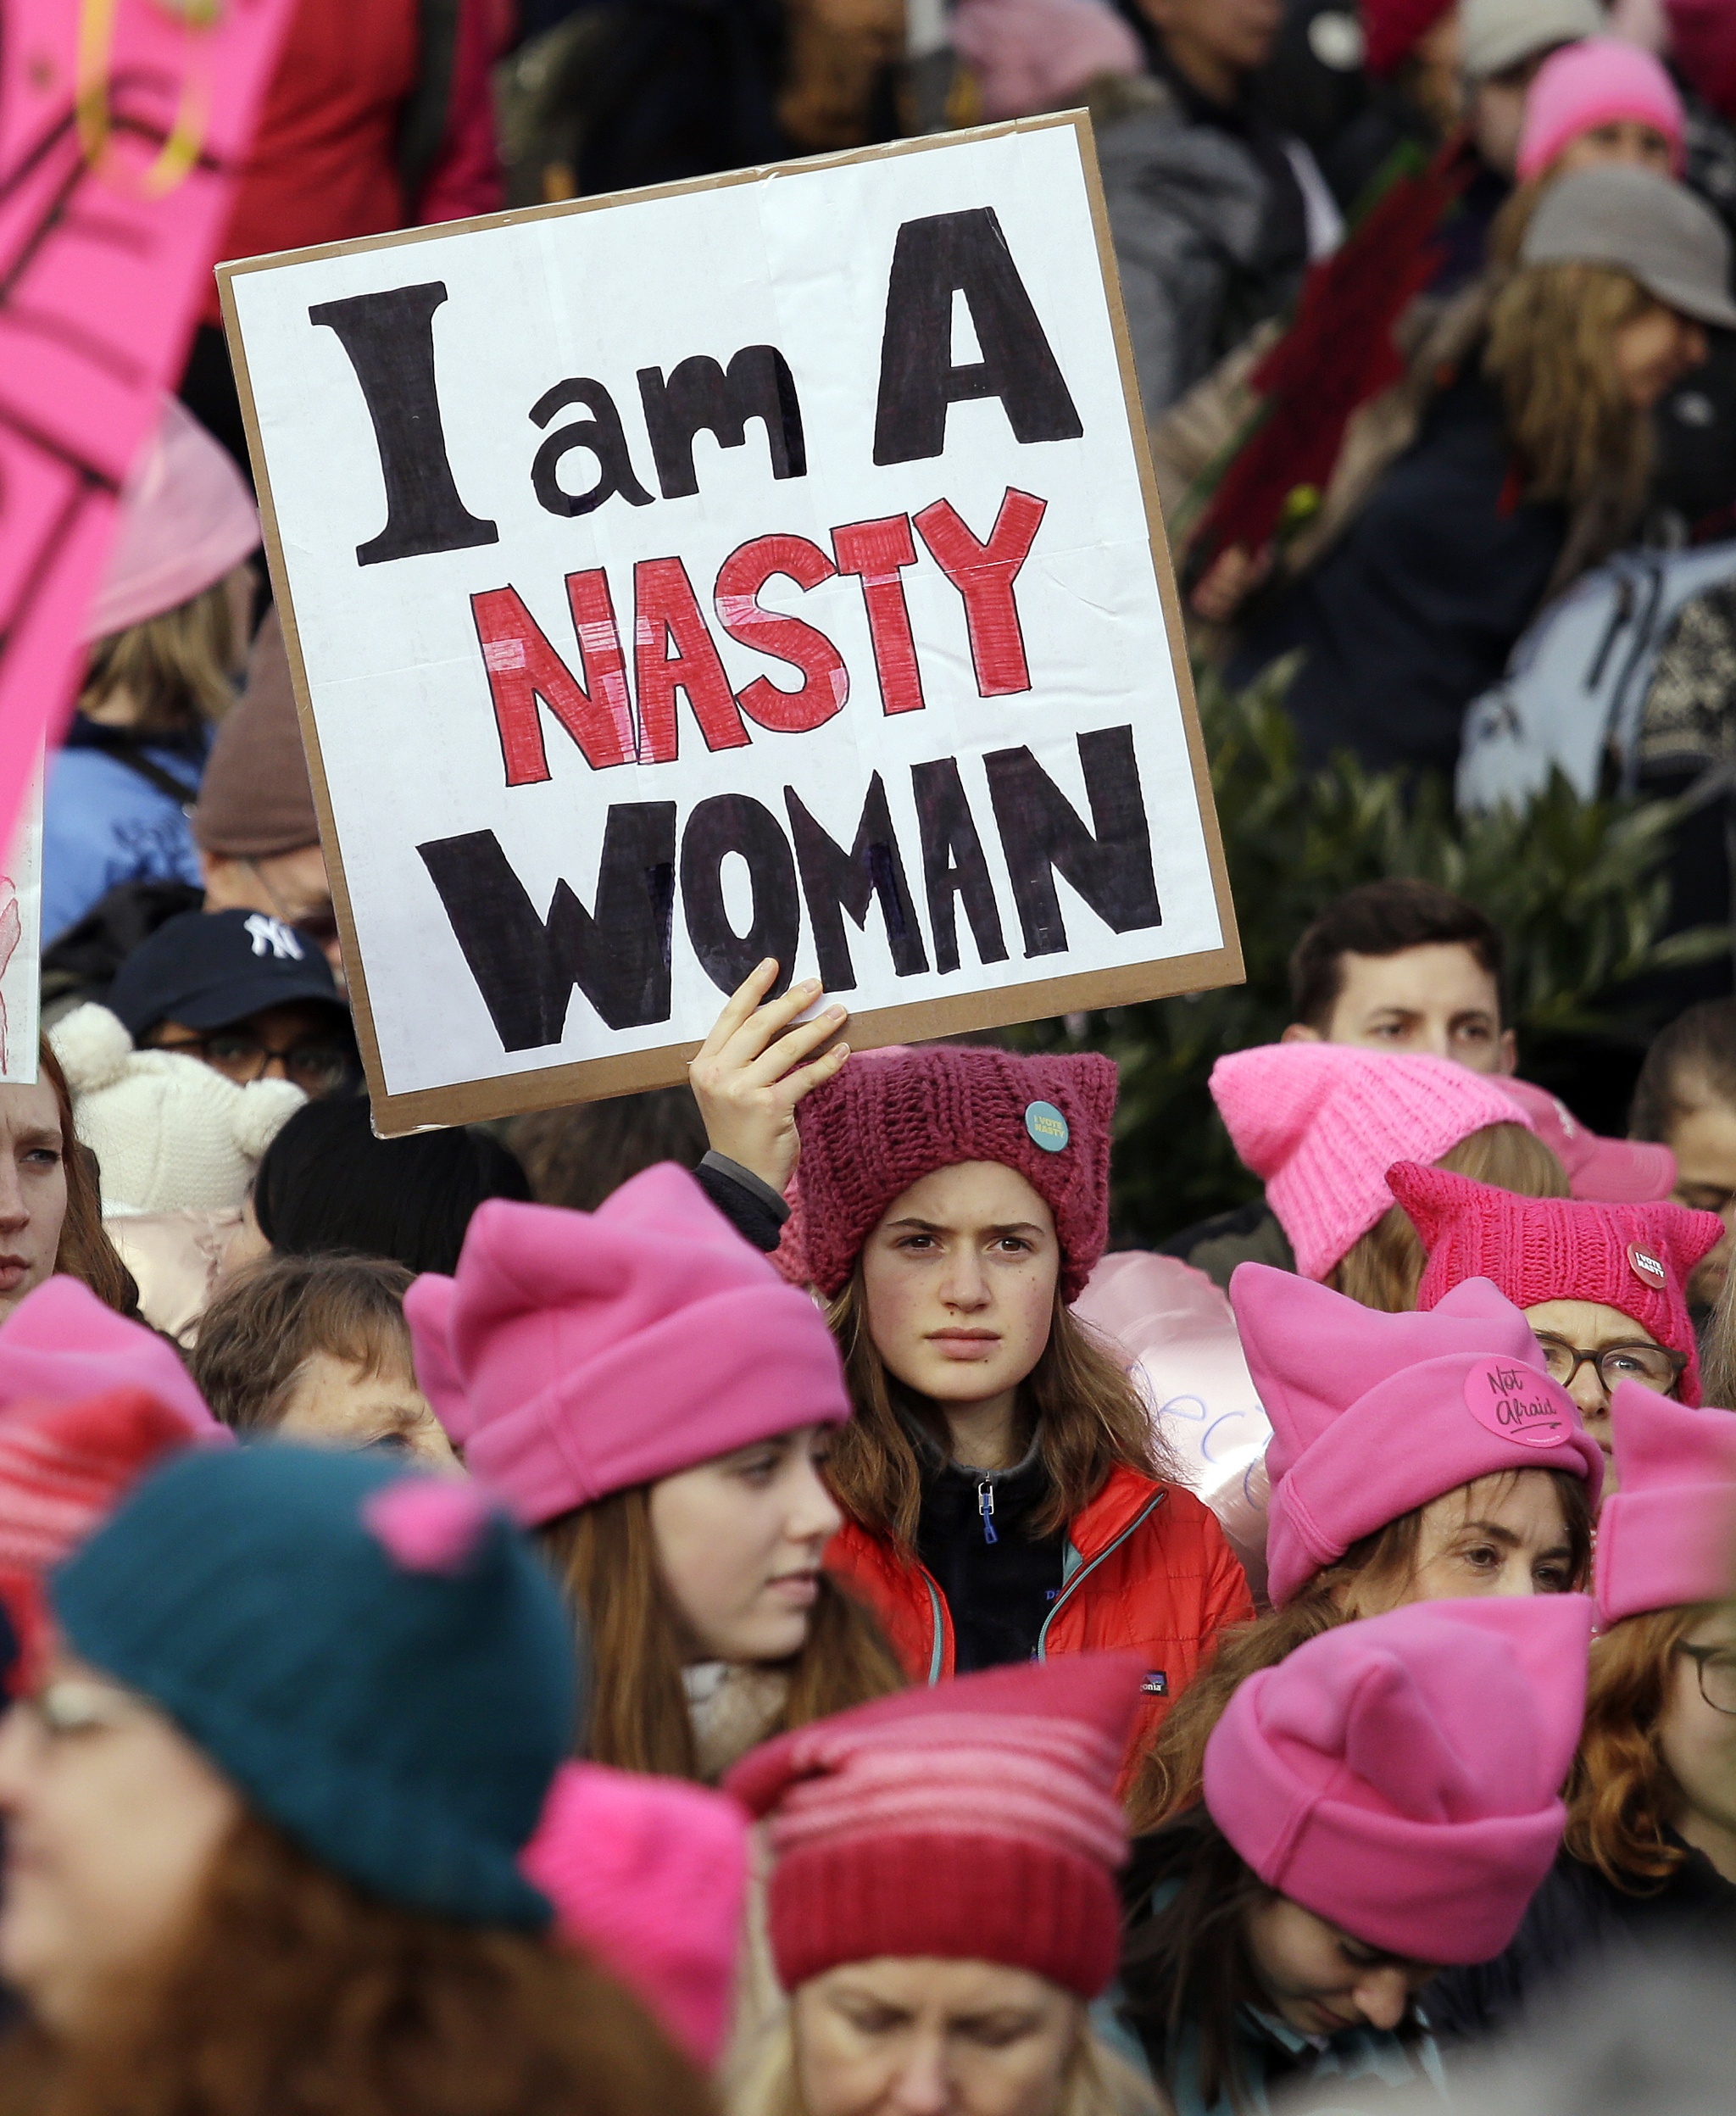 A woman holds a sign amidst a sea of pink caps before a women’s march Saturday in Seattle. Women across the Pacific Northwest marched in solidarity with the Women’s March on Washington and to send a message in support of women’s rights and other causes. (Elaine Thompson/The Associated Press)